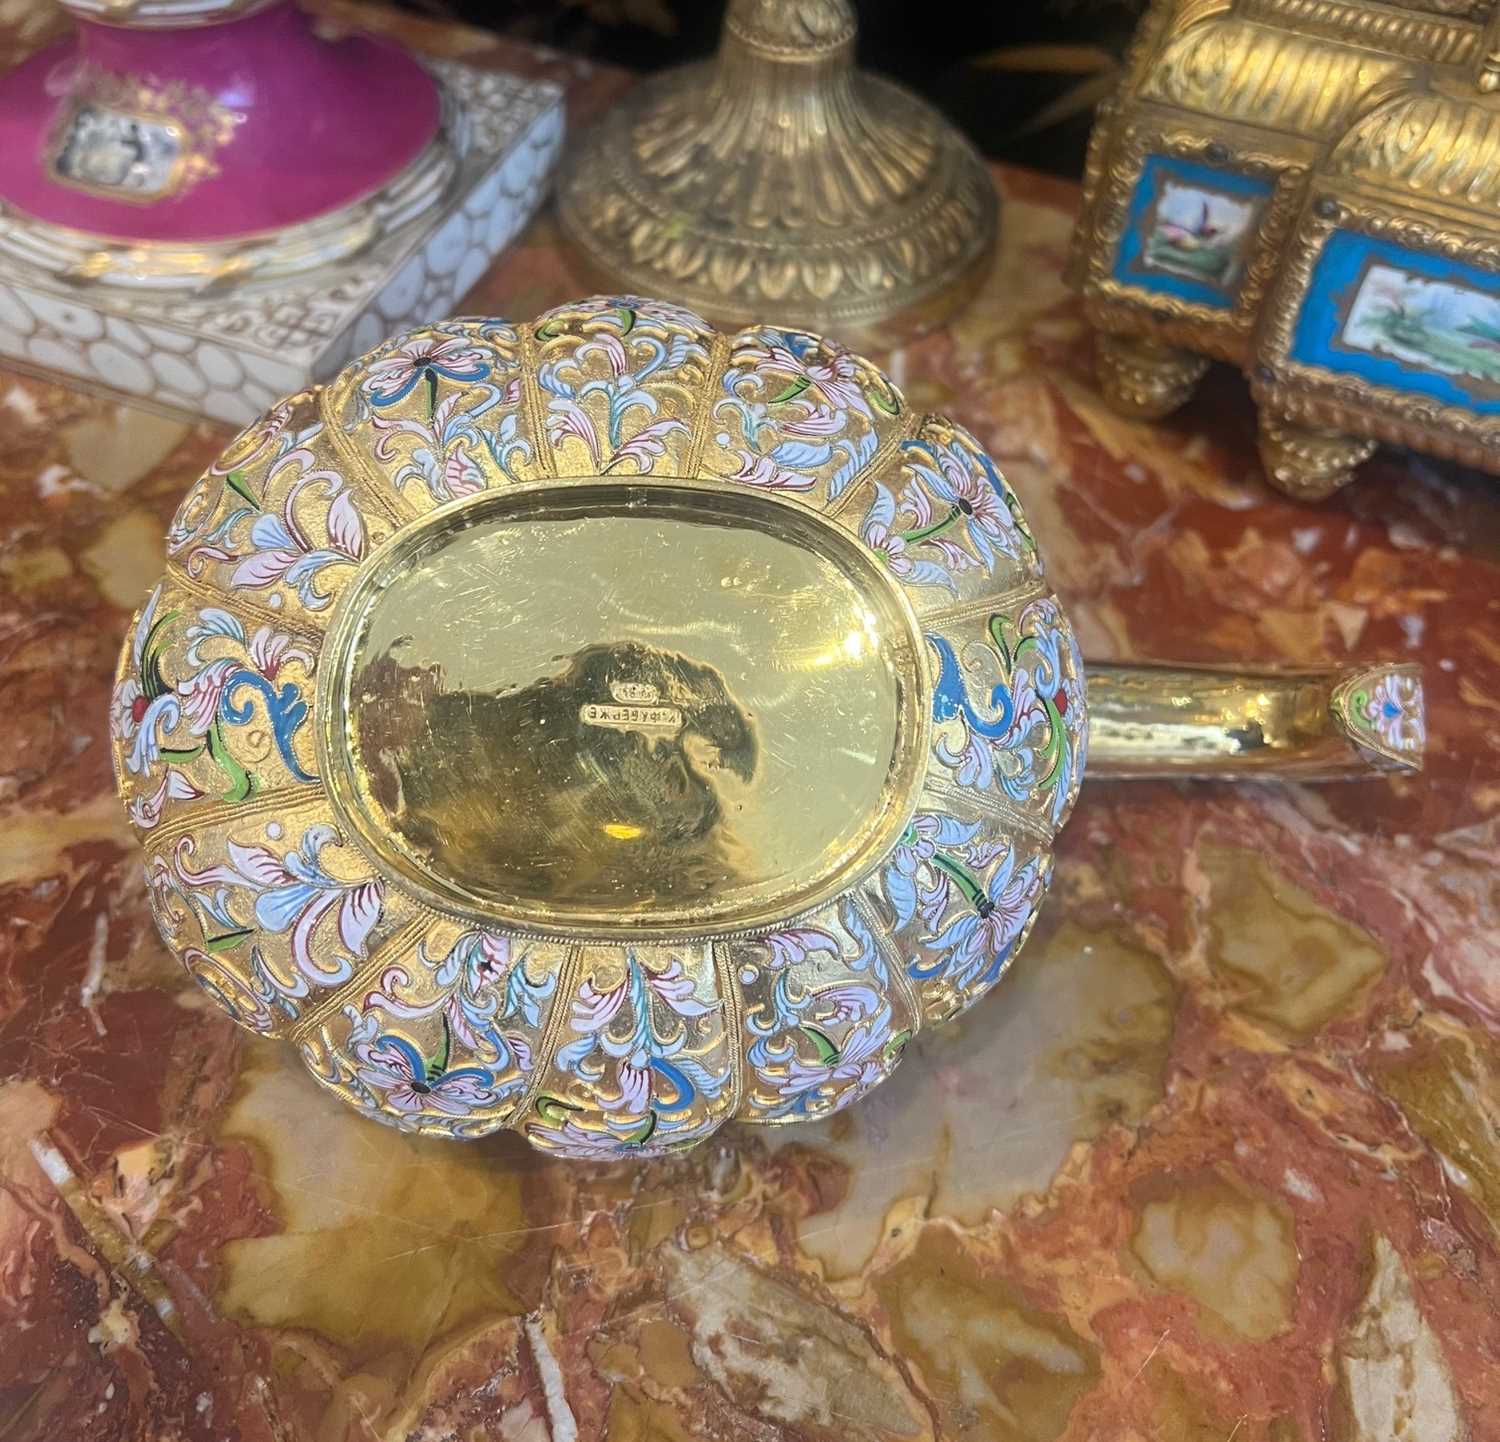 A FINE SILVER GILT AND CLOISONNE ENAMEL RUSSIAN STYLE BIRD KOVSH SET - Image 12 of 12